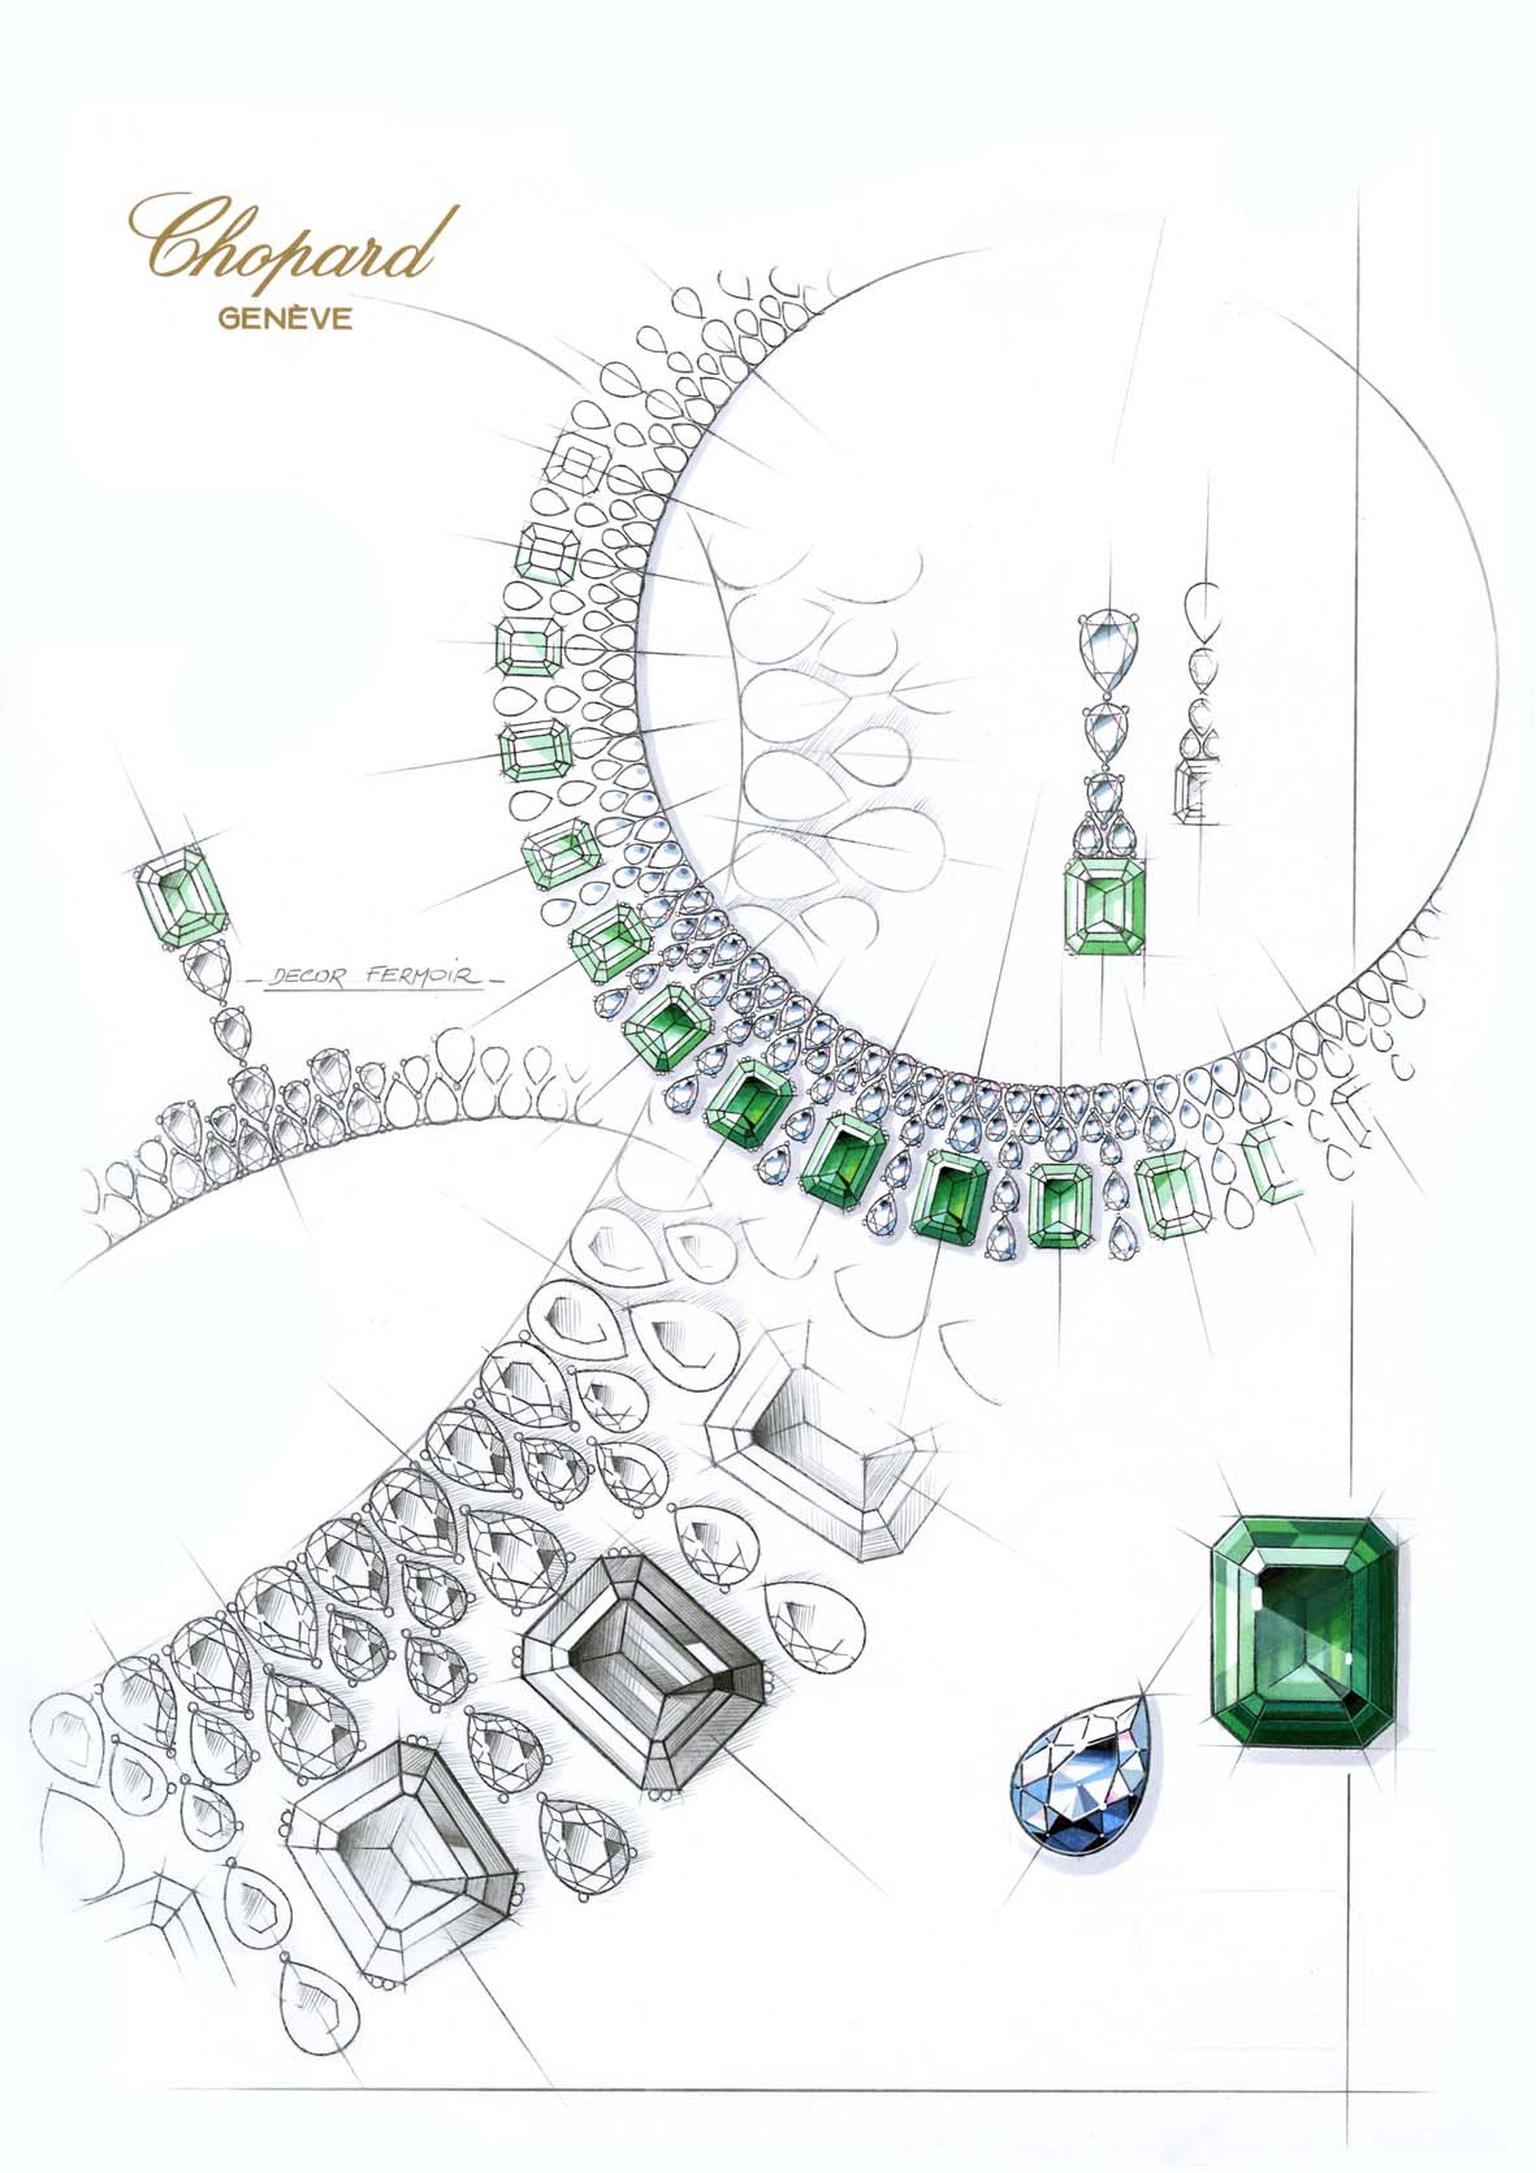 819356-1001 Sketch Emerald Necklace from the Red Carpet Collection 2013ChopardChopard.jpg